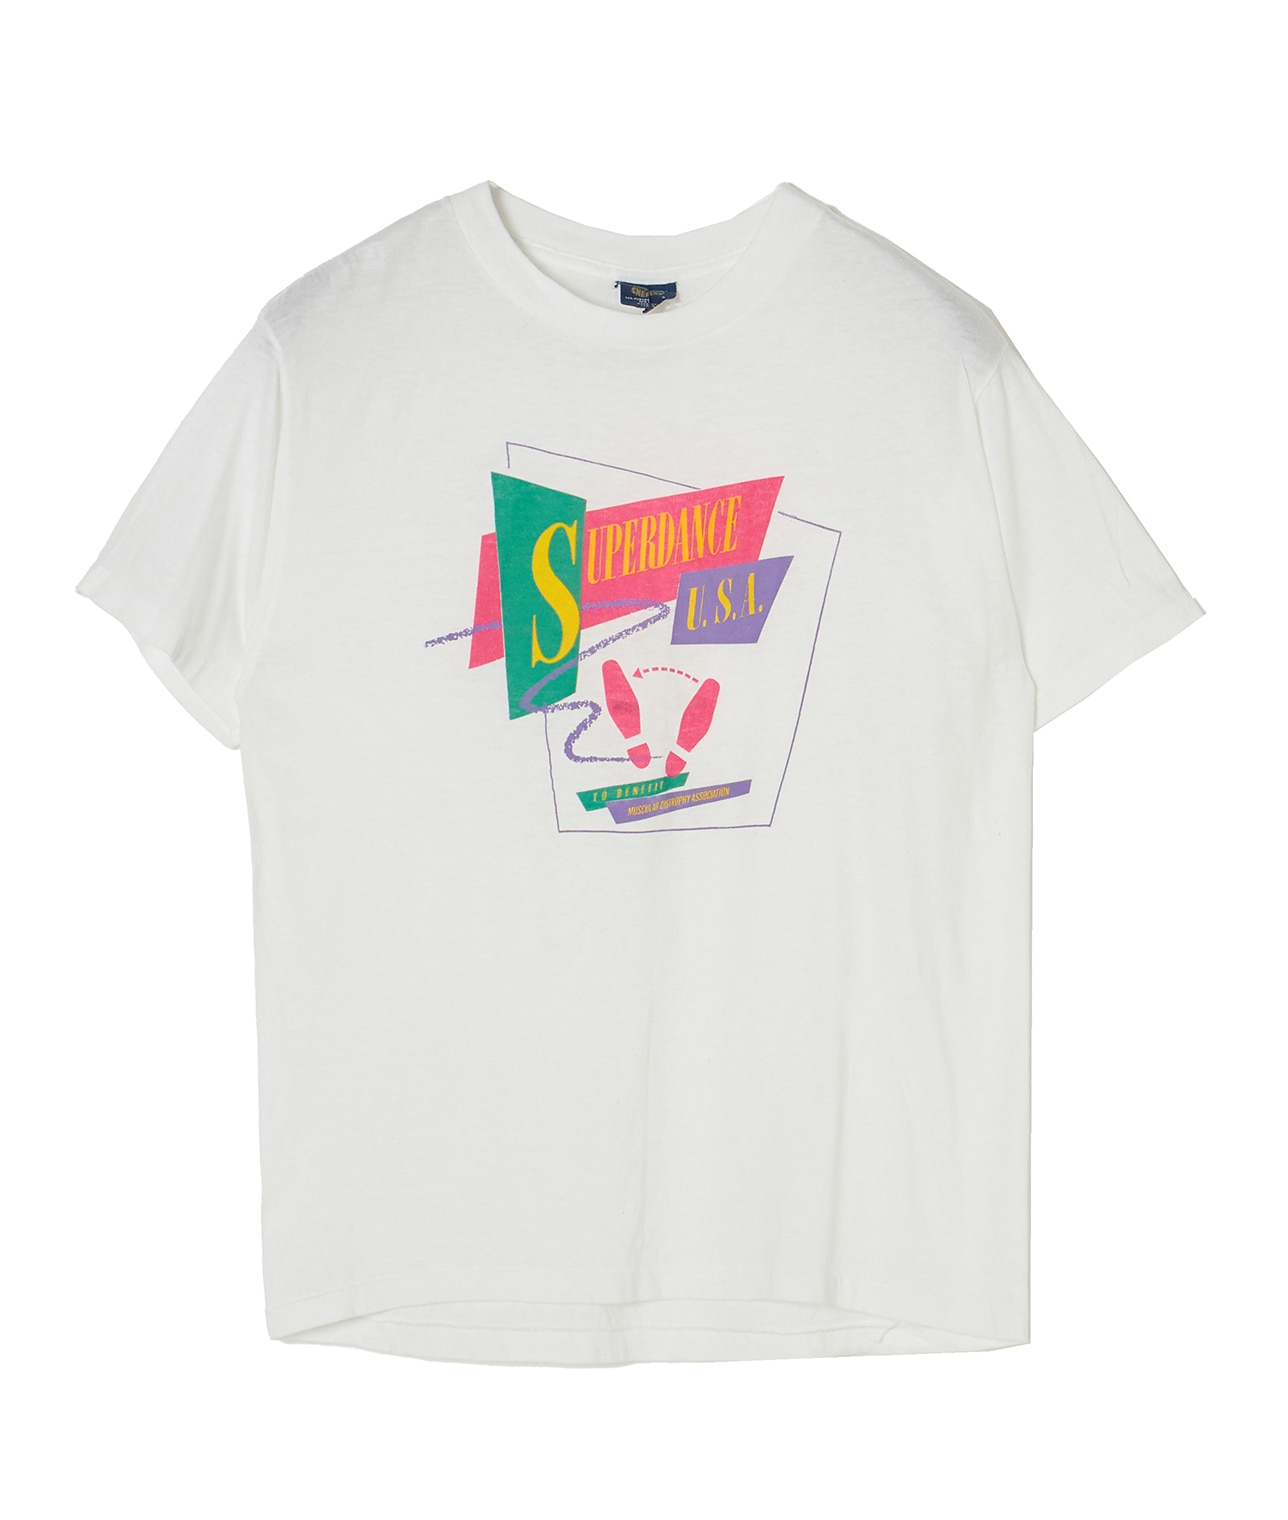 USED/SUPERDANCE U.S.A./プリントTシャツ 詳細画像 WHITE 1